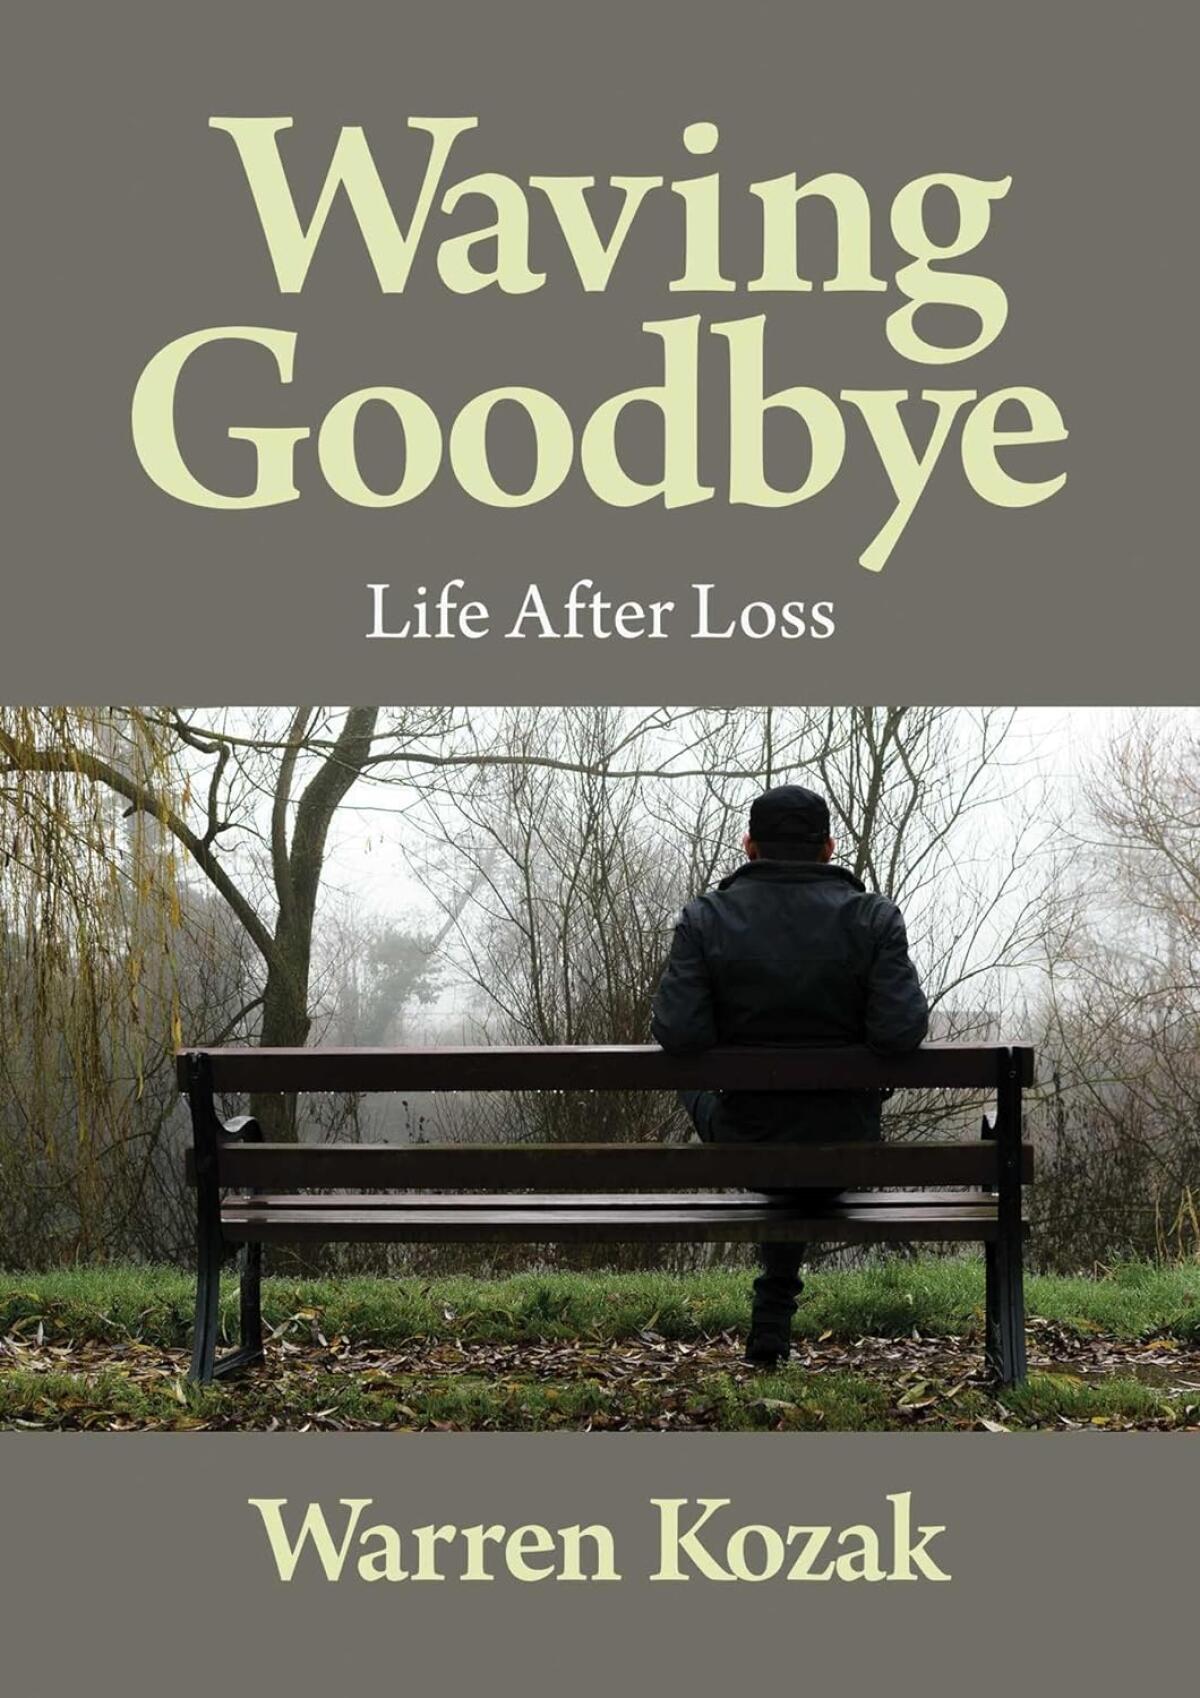 "Waving Goodbye: Life After Loss" is Warren Kozak's new book about coping with the death of his wife.